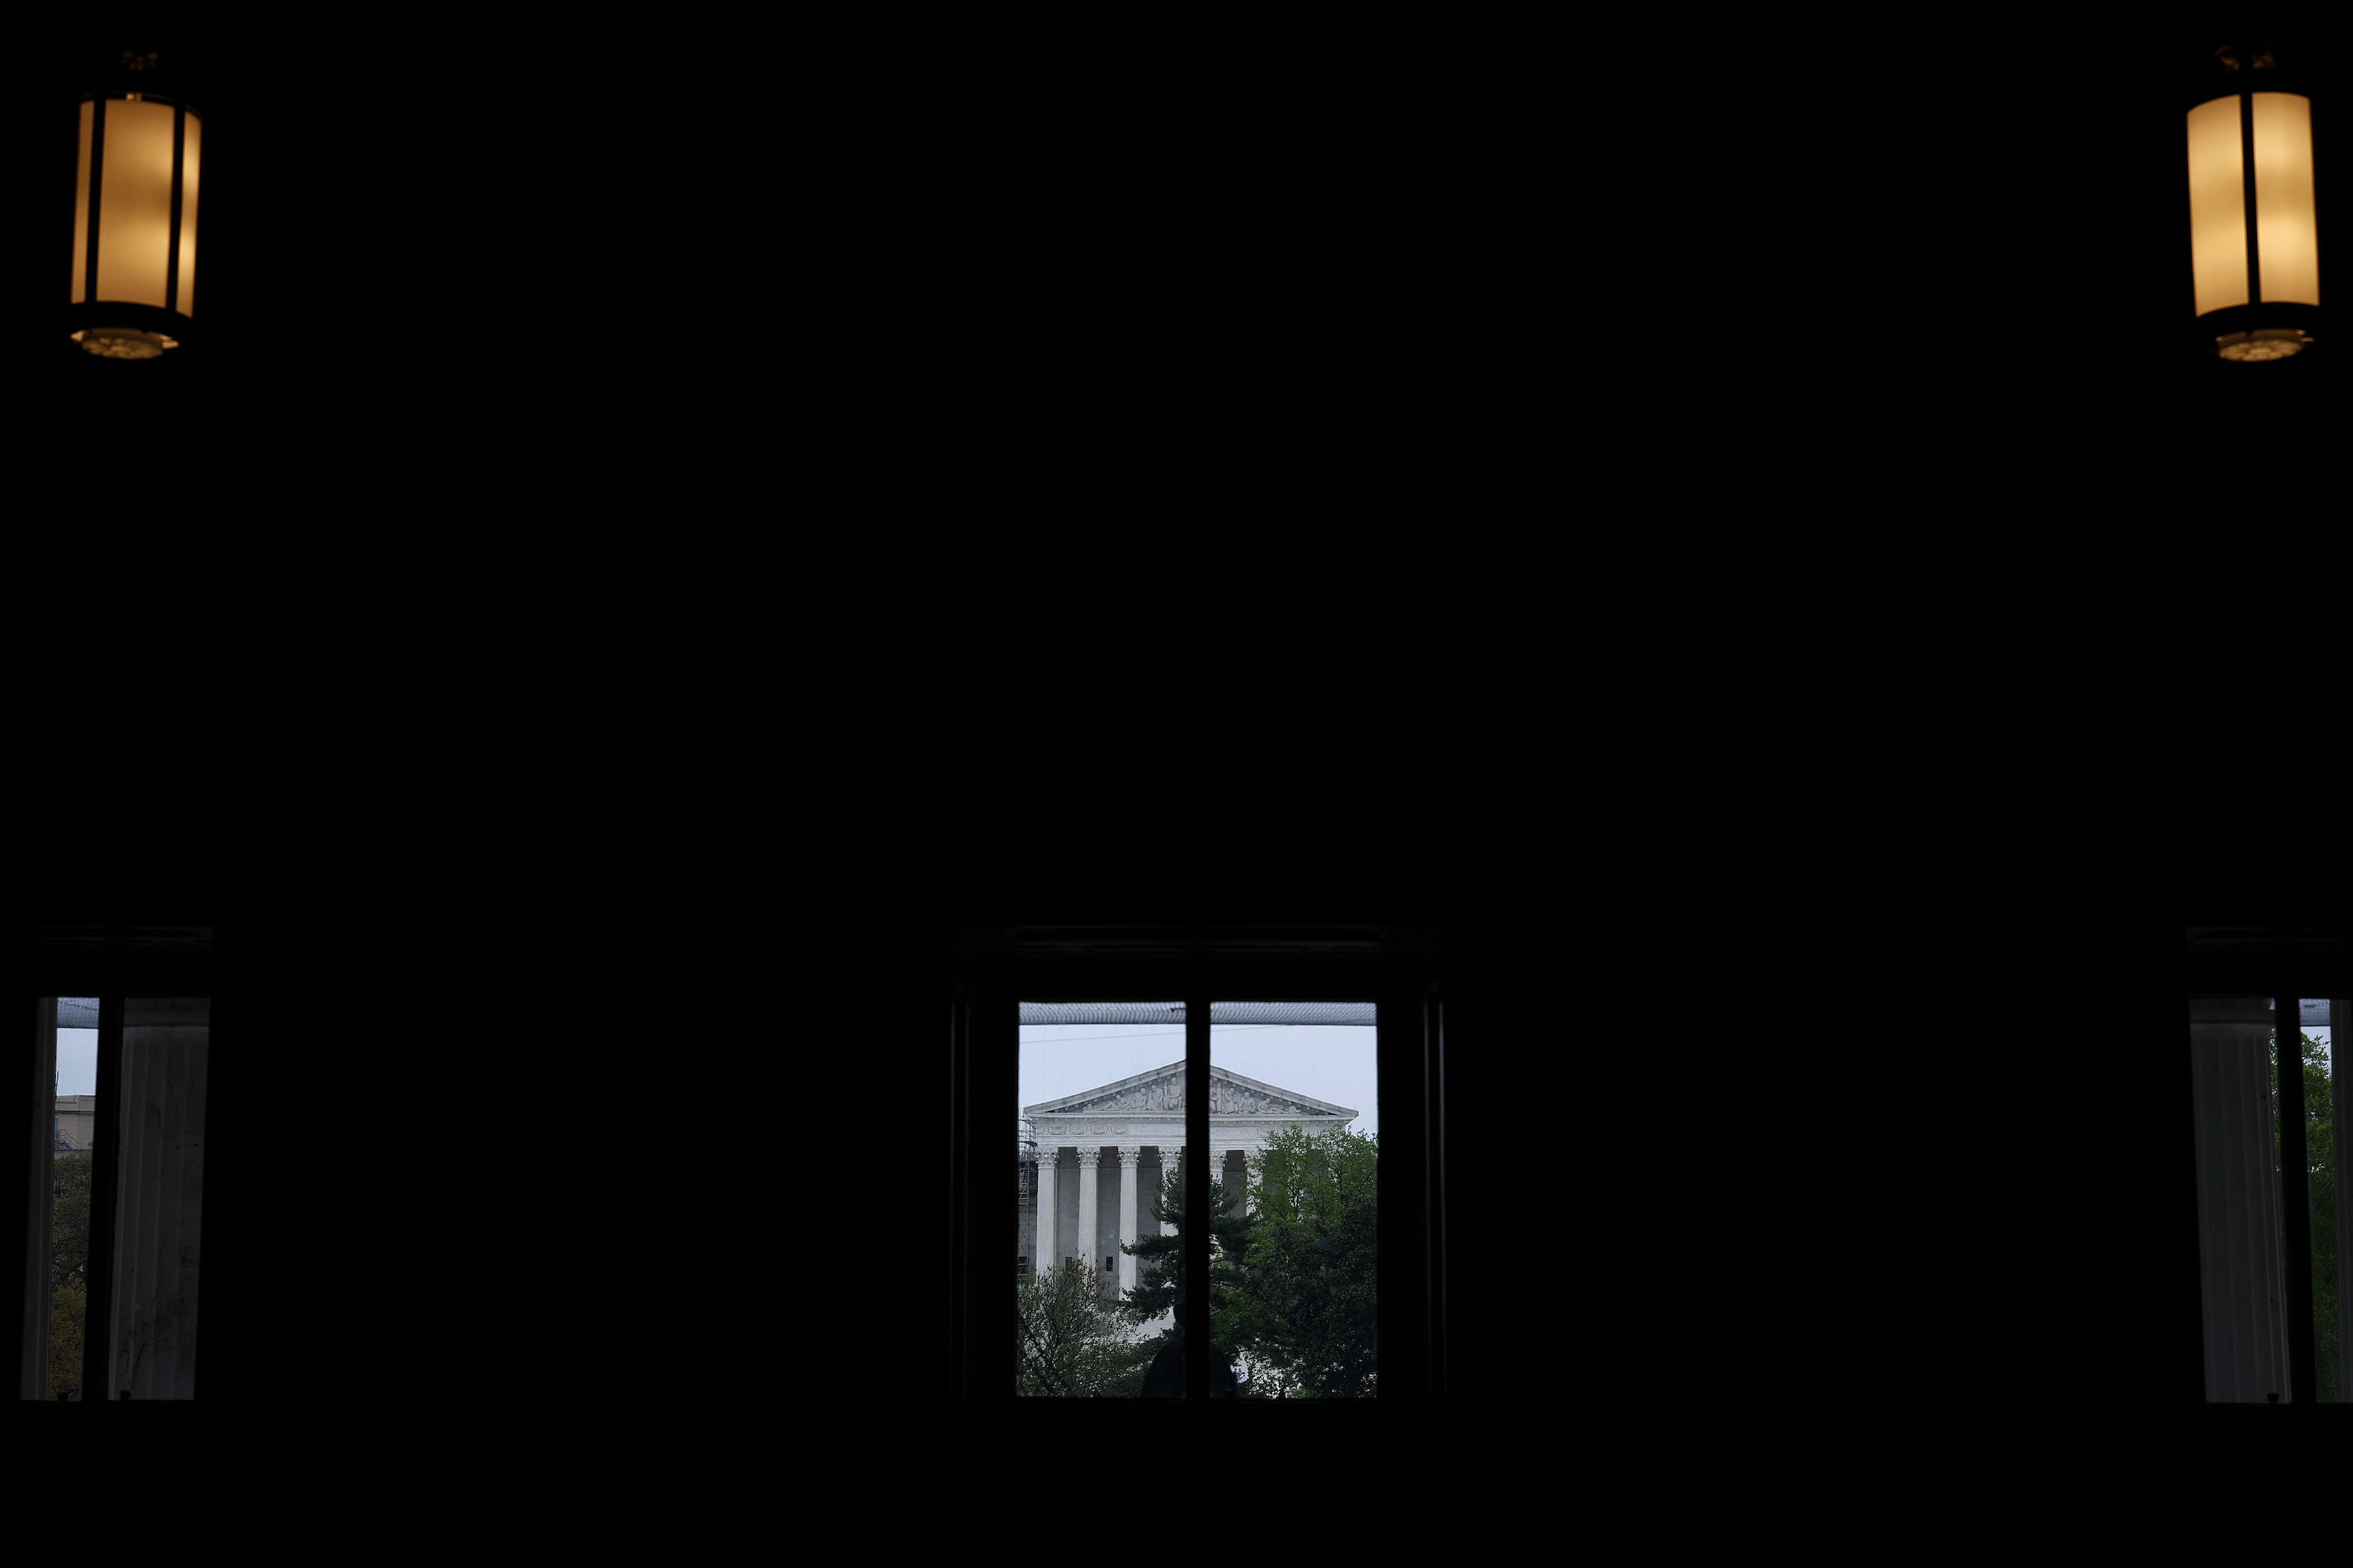 The United States Supreme Court building seen from a distance, through a window, from inside a darkened room.